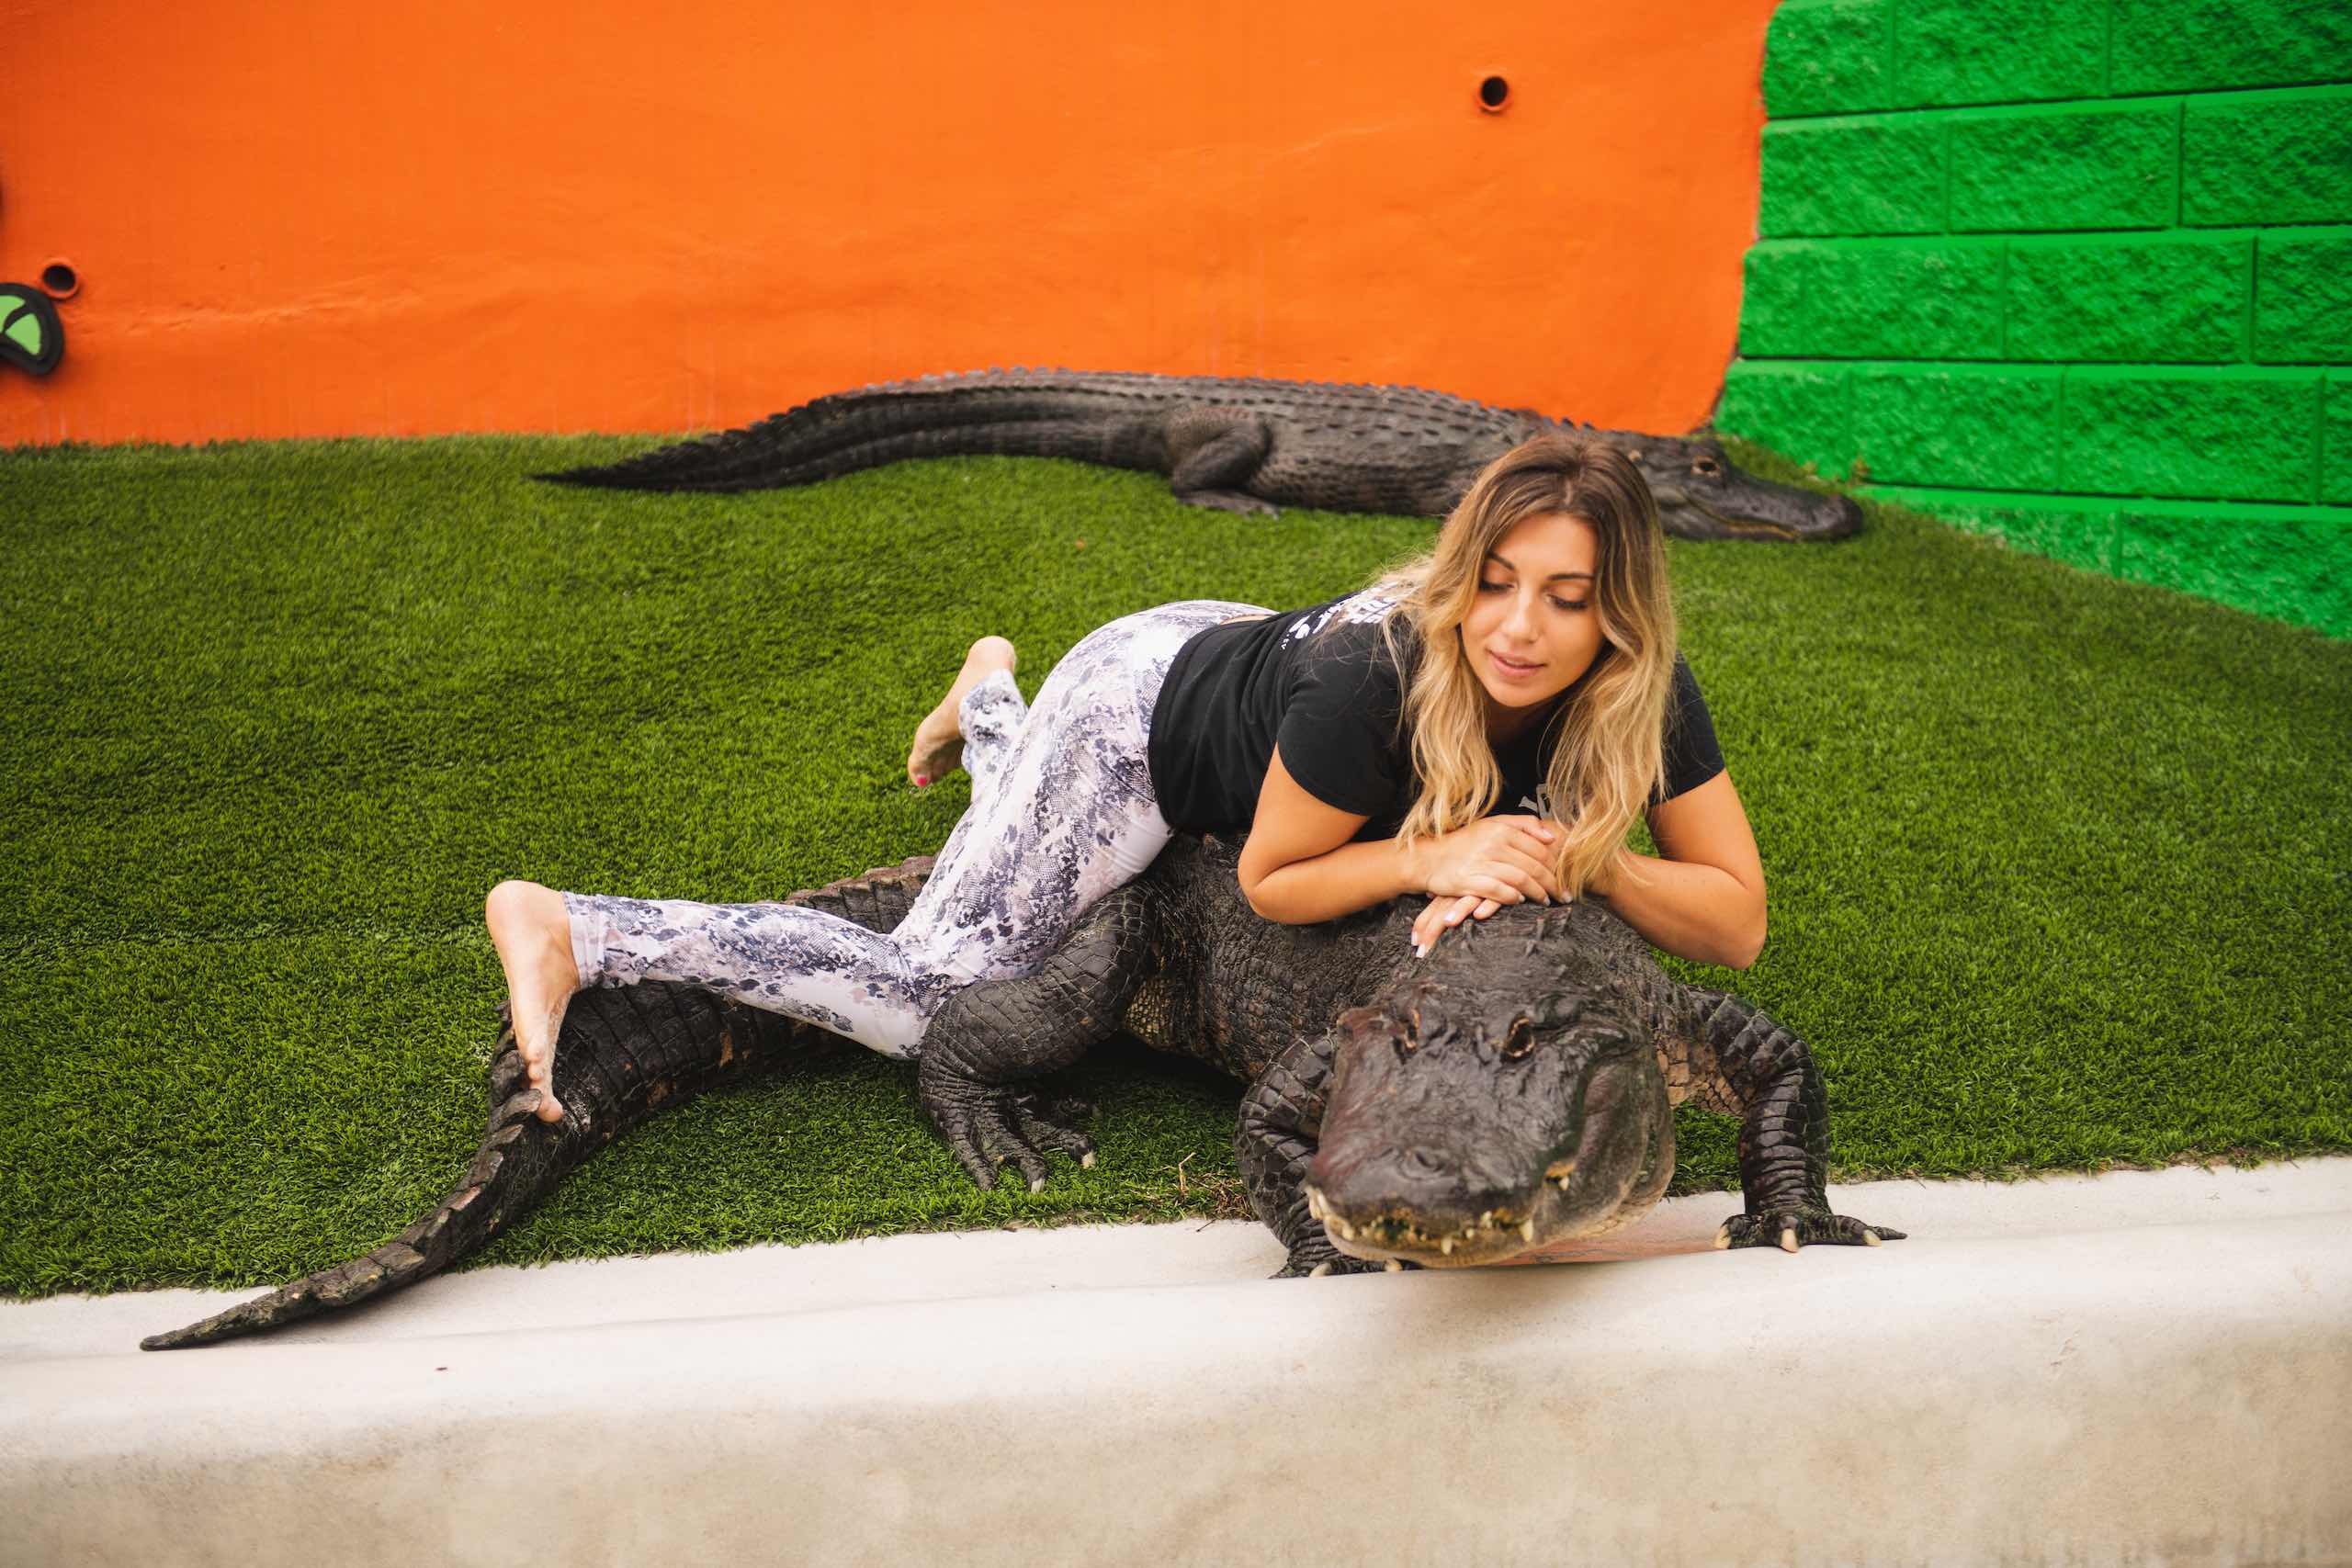 Everglades Holiday Park Woman with long blond hair laying on top of an alligator on grass turf with another alligator behind her